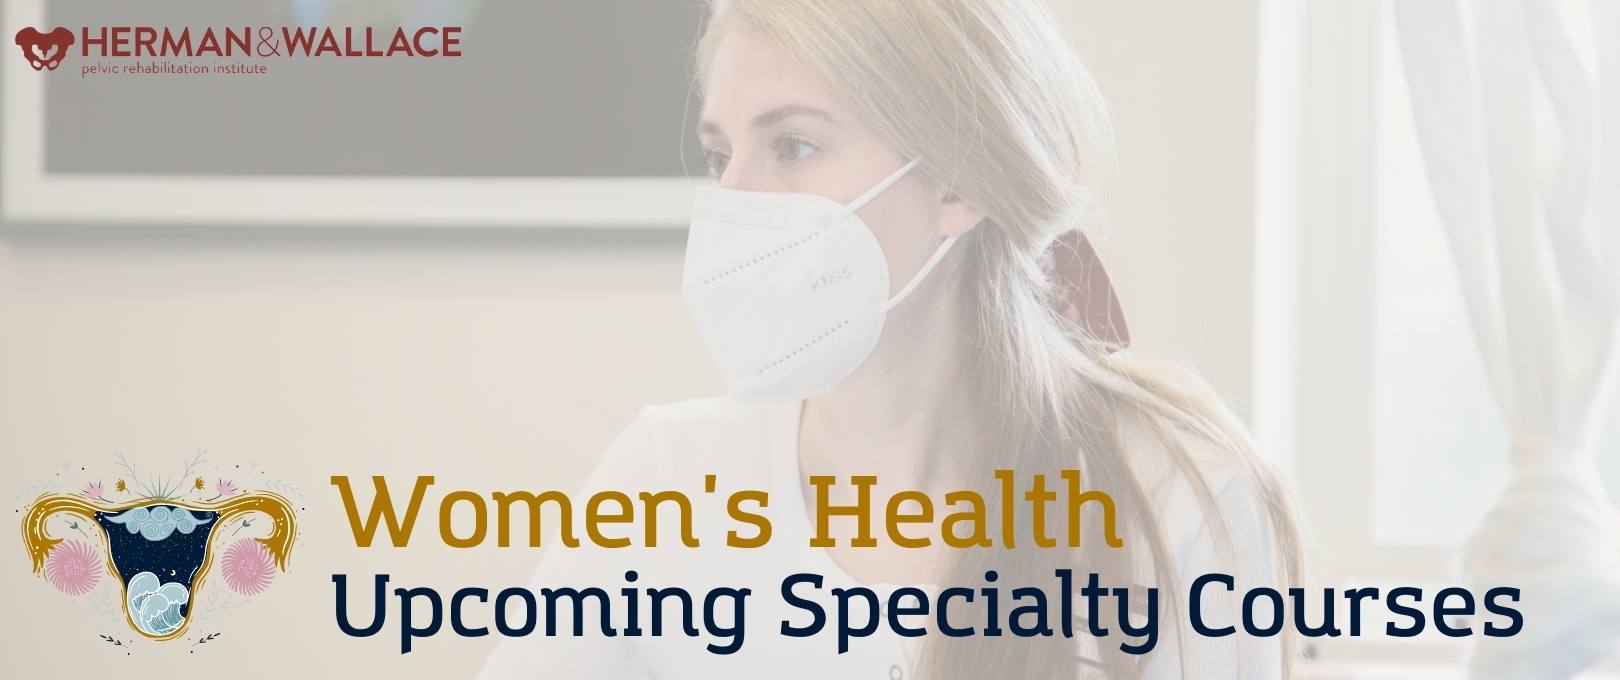 Women's Health - Upcoming Specialty Courses